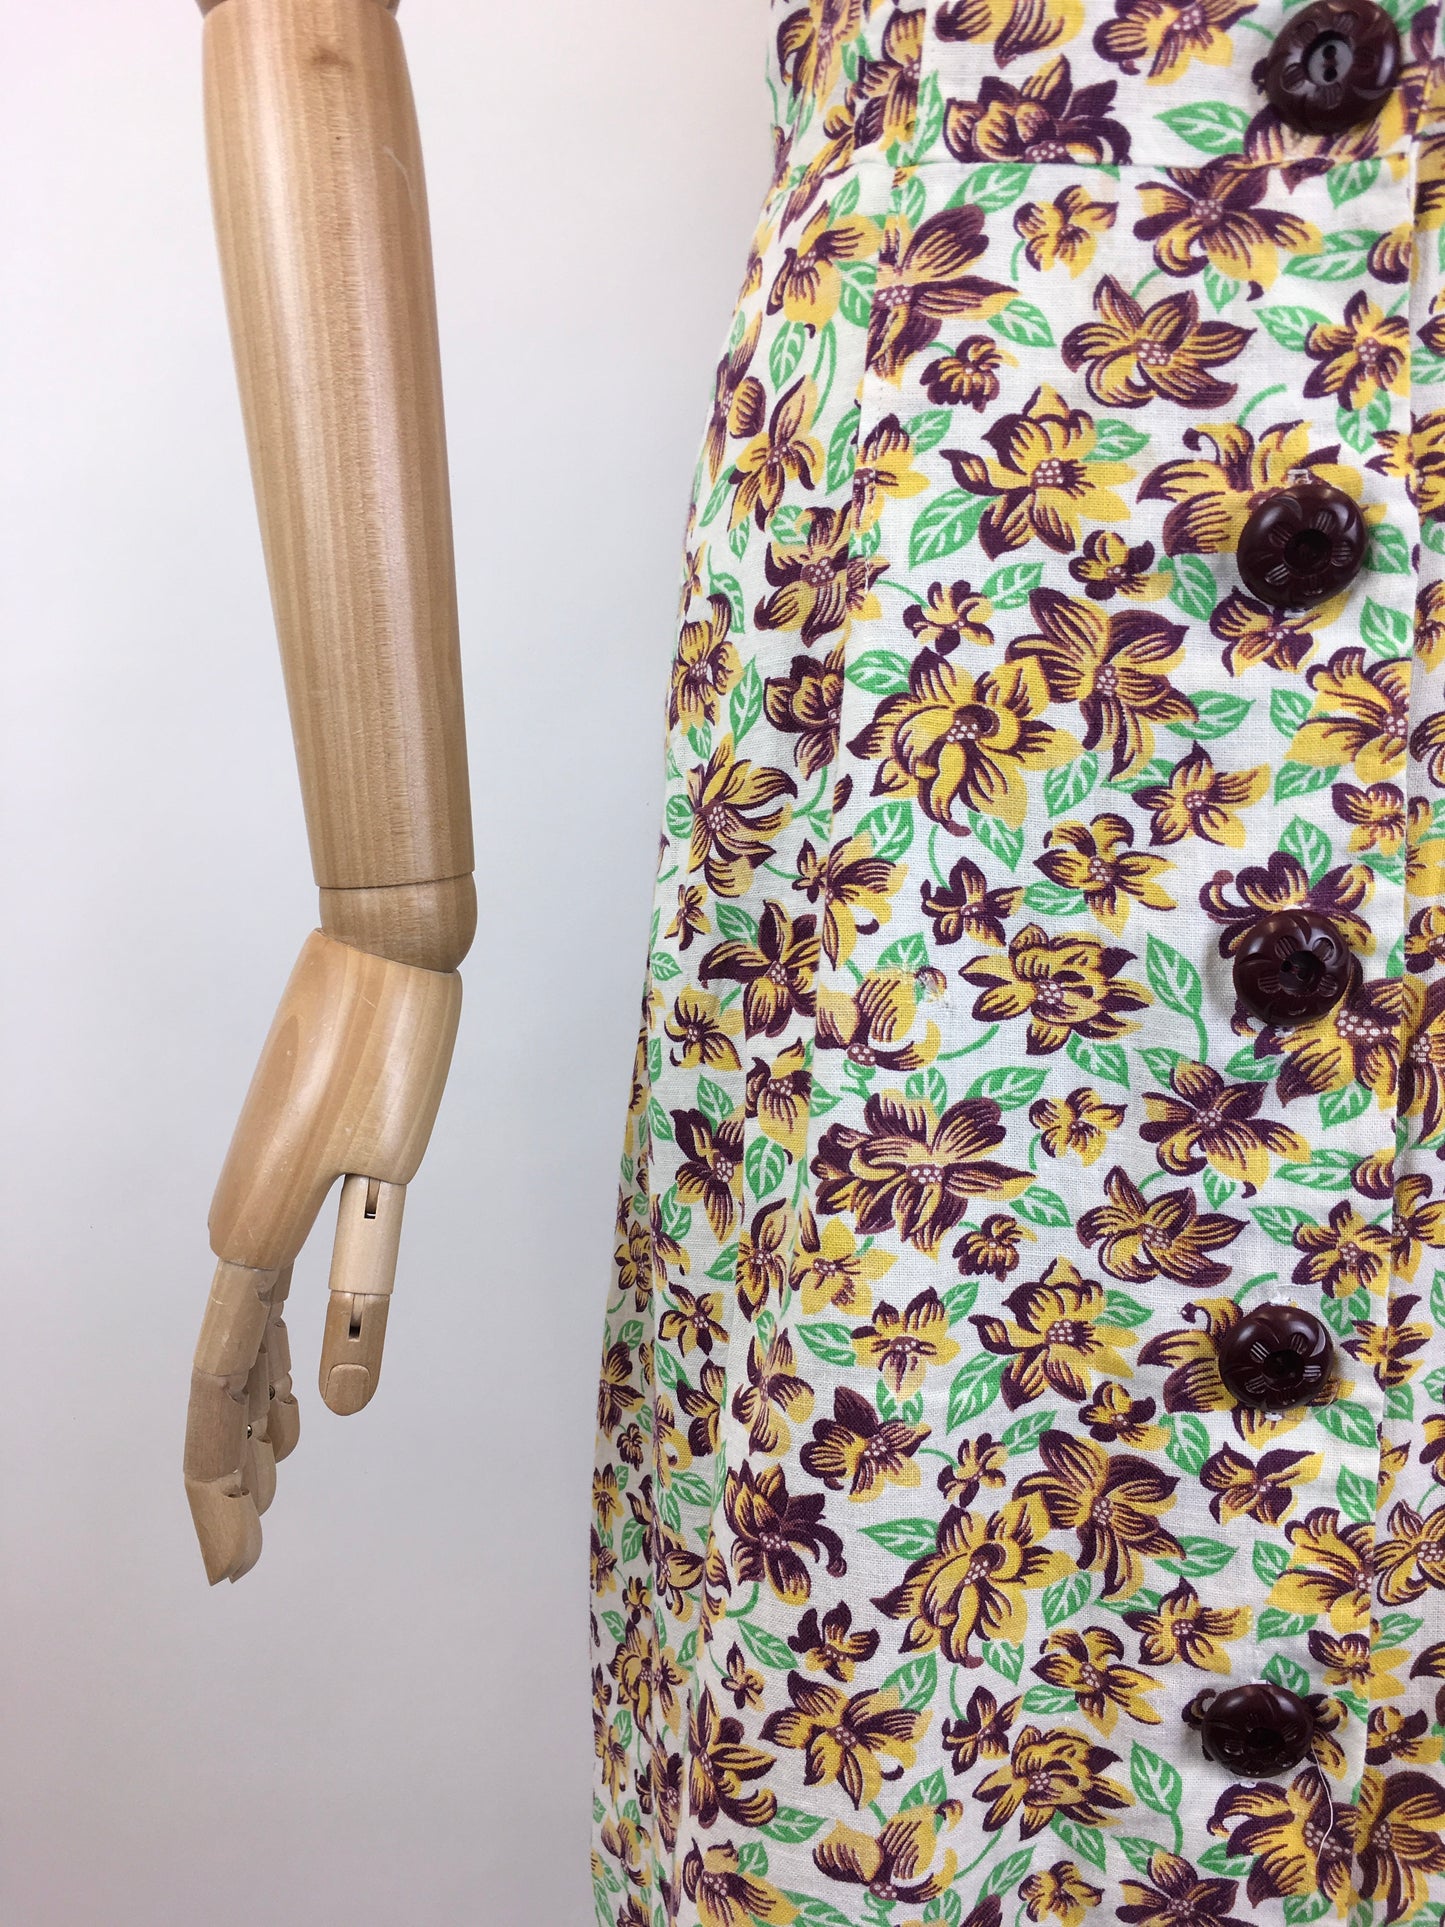 Original Late 1930’s Floral Print Button Down Front Dress - In Yellows, Maroons and Greens on Ivory